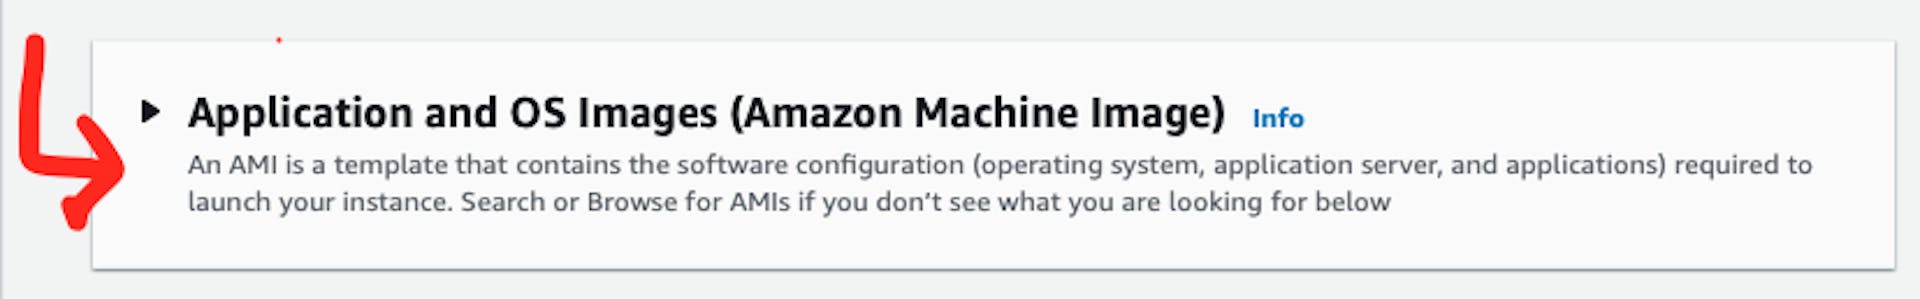 The screenshot of AWS web page with the pointer to "Application and OS Images (Amazon Machine Image)" section